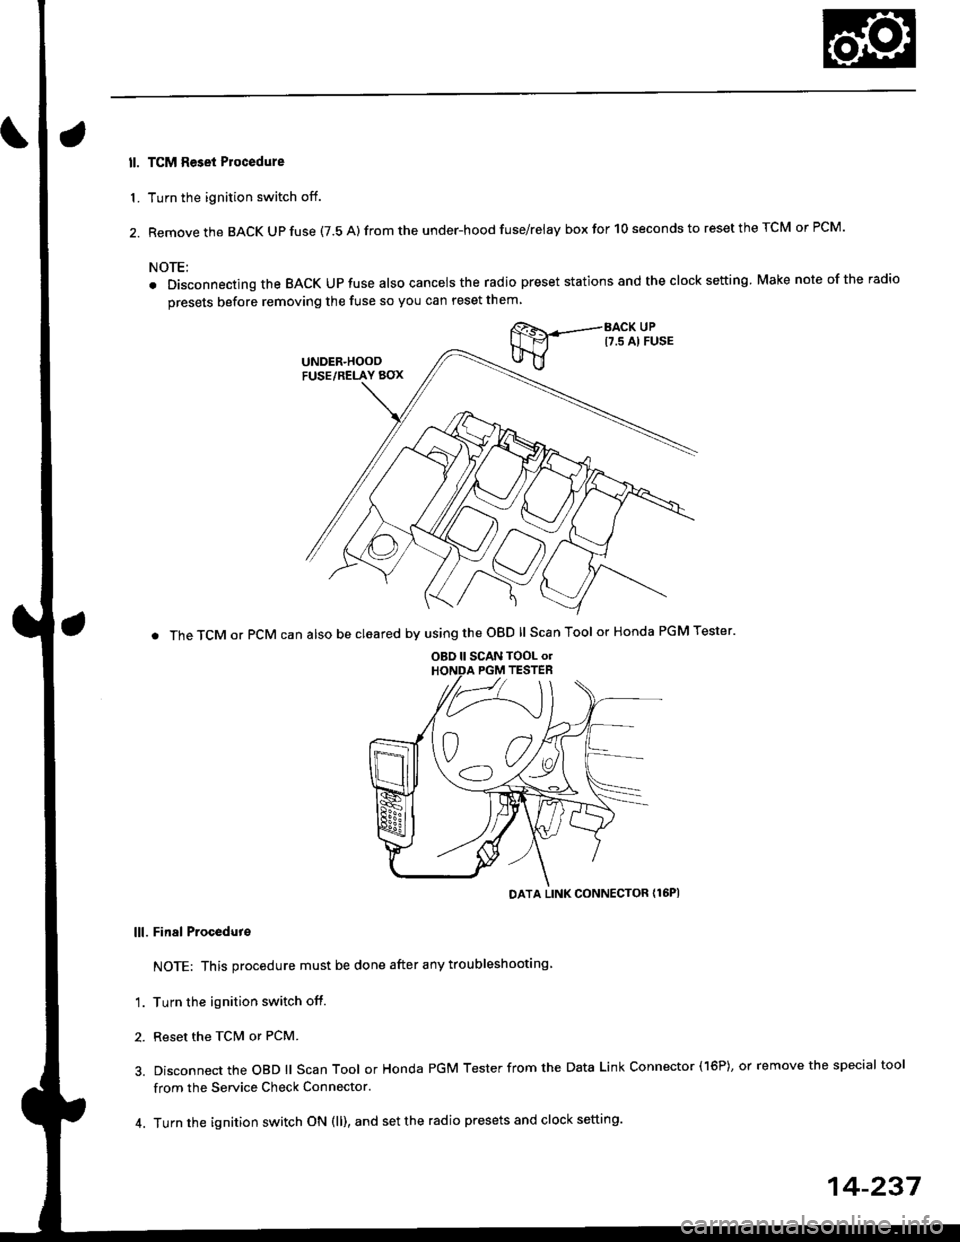 HONDA CIVIC 1996 6.G Owners Manual ll. TCM Reset Plocedure
1. Turn the ignition switch off.
2. Remove the BACK Up fuse (7.5 A) from the under-hood fuse/relay box for 10 seconds to reset the TCM or PCM.
NOTE:
. Disconnecting the BACK UP